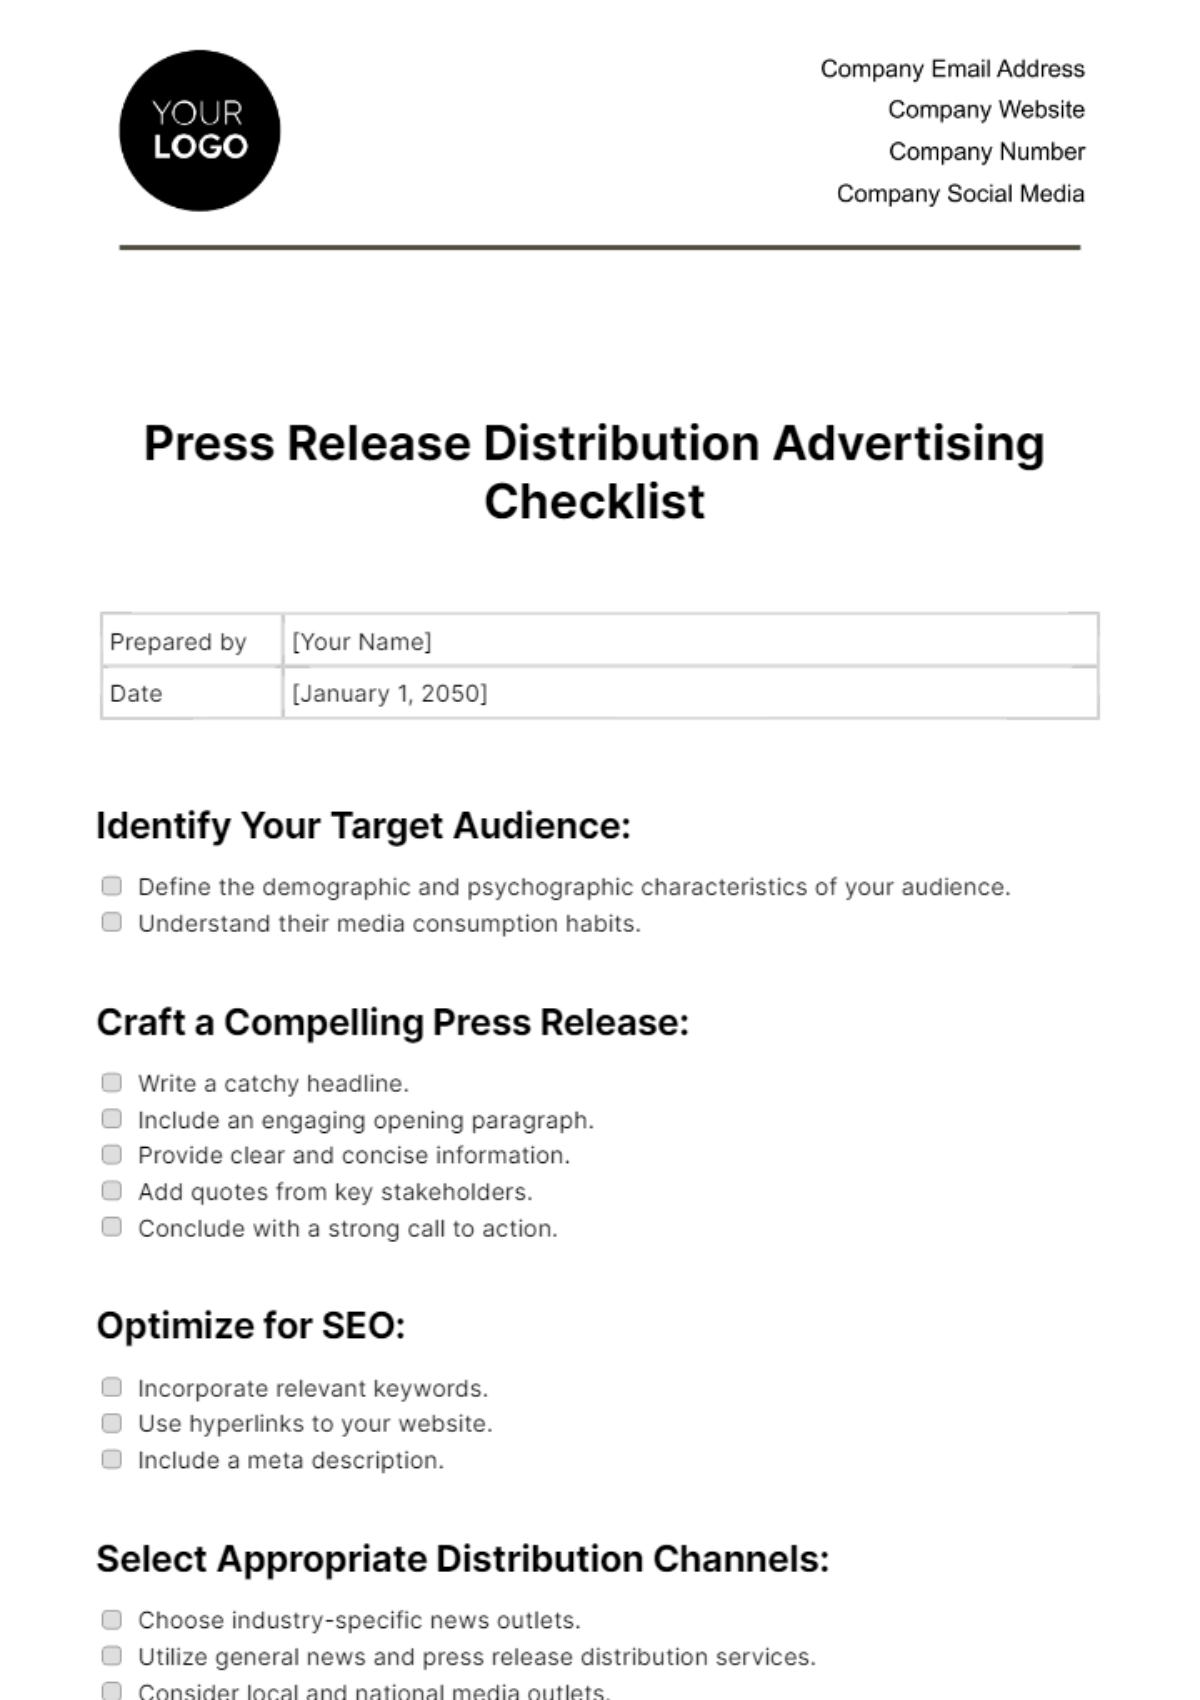 Free Press Release Distribution Advertising Checklist Template